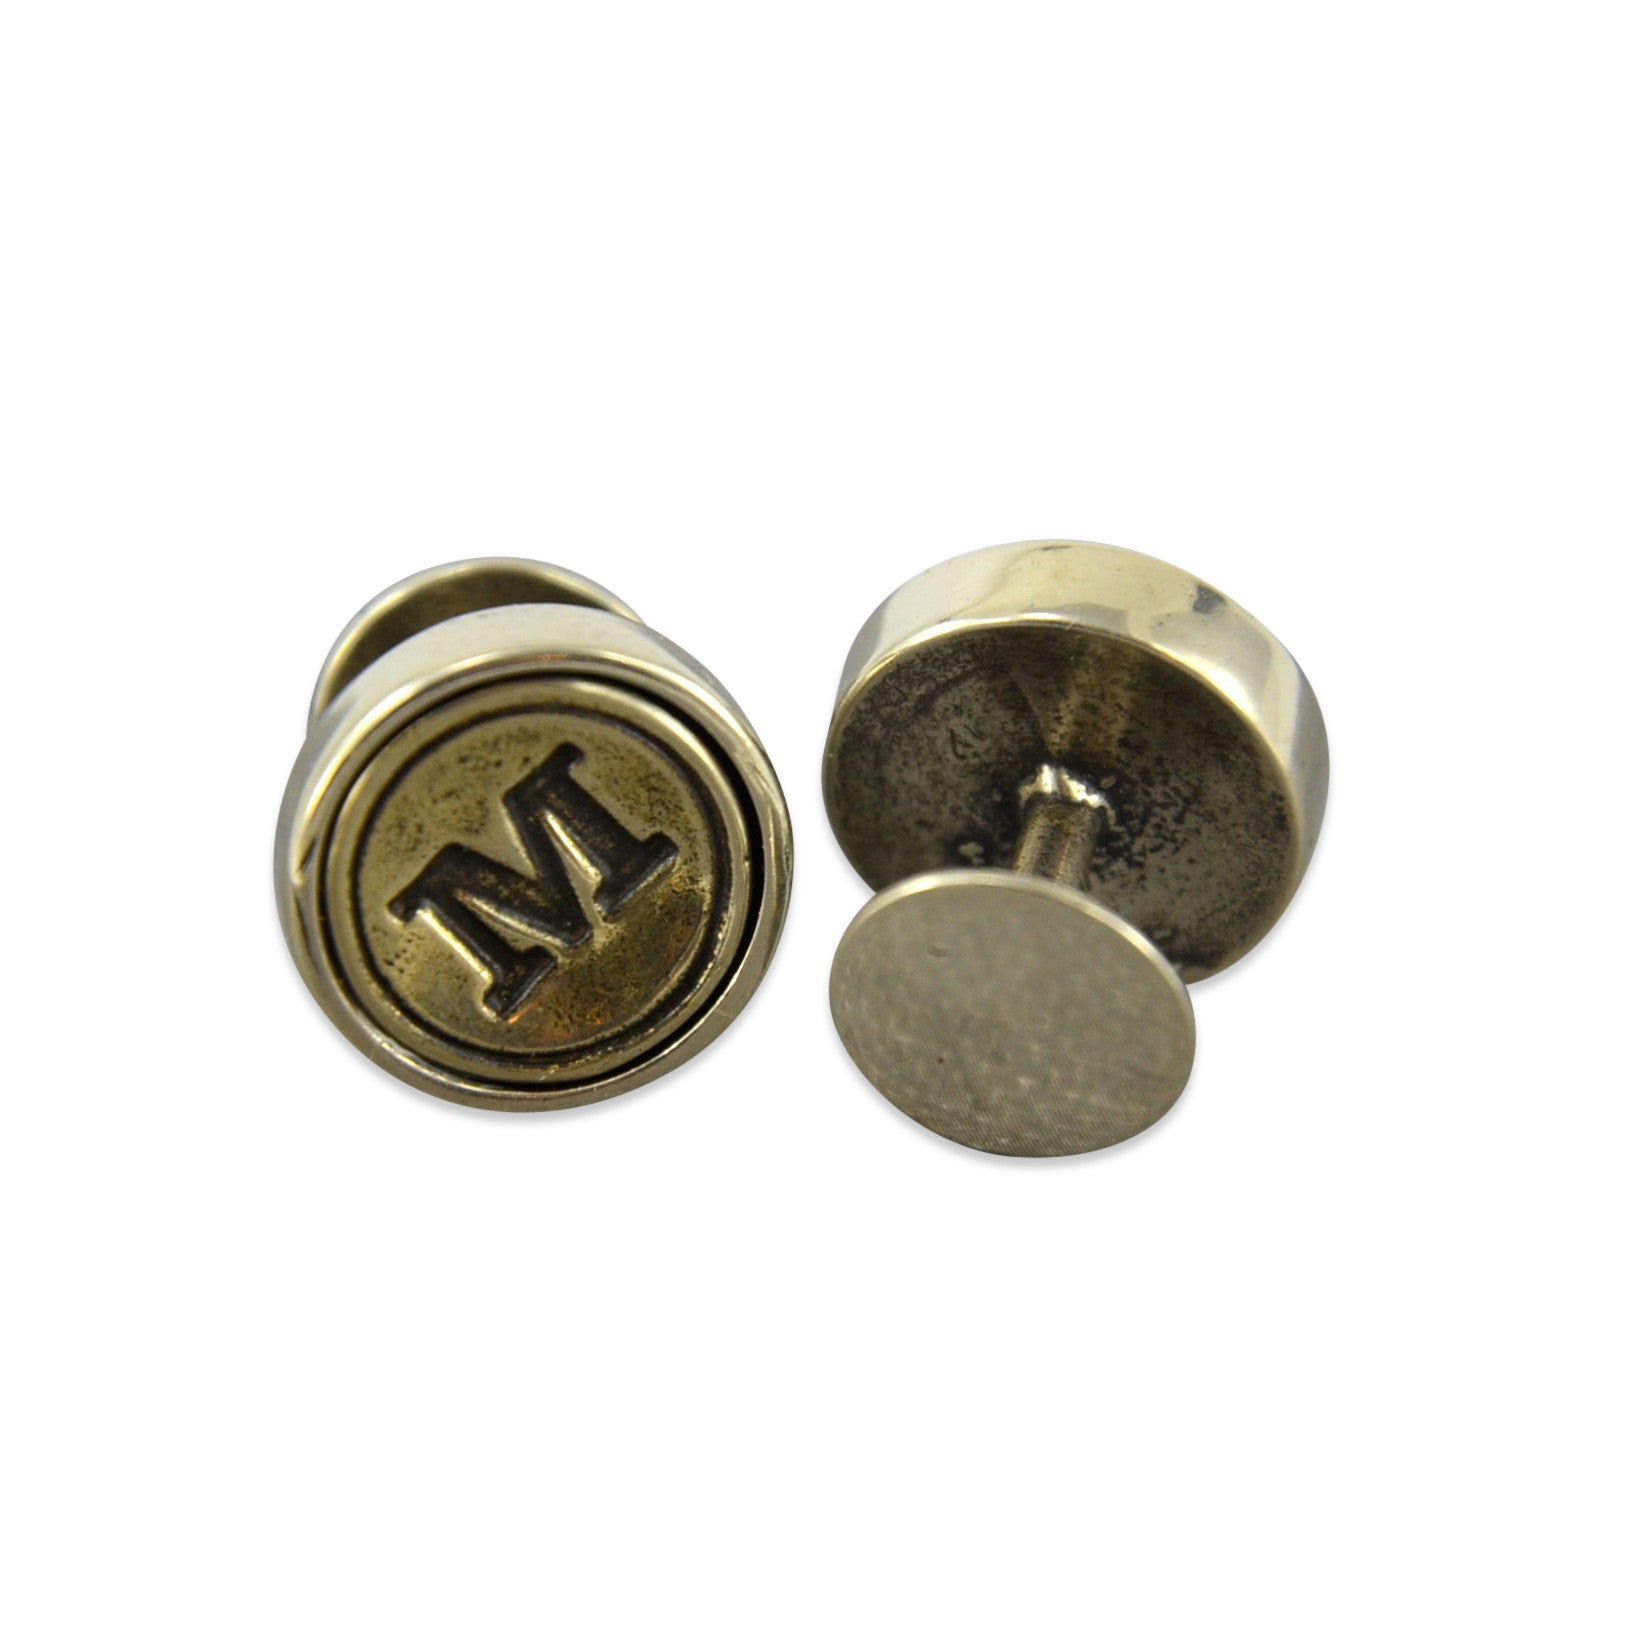 Personalized Initial Letter Cuff Links - Gwen Delicious Jewelry Designs